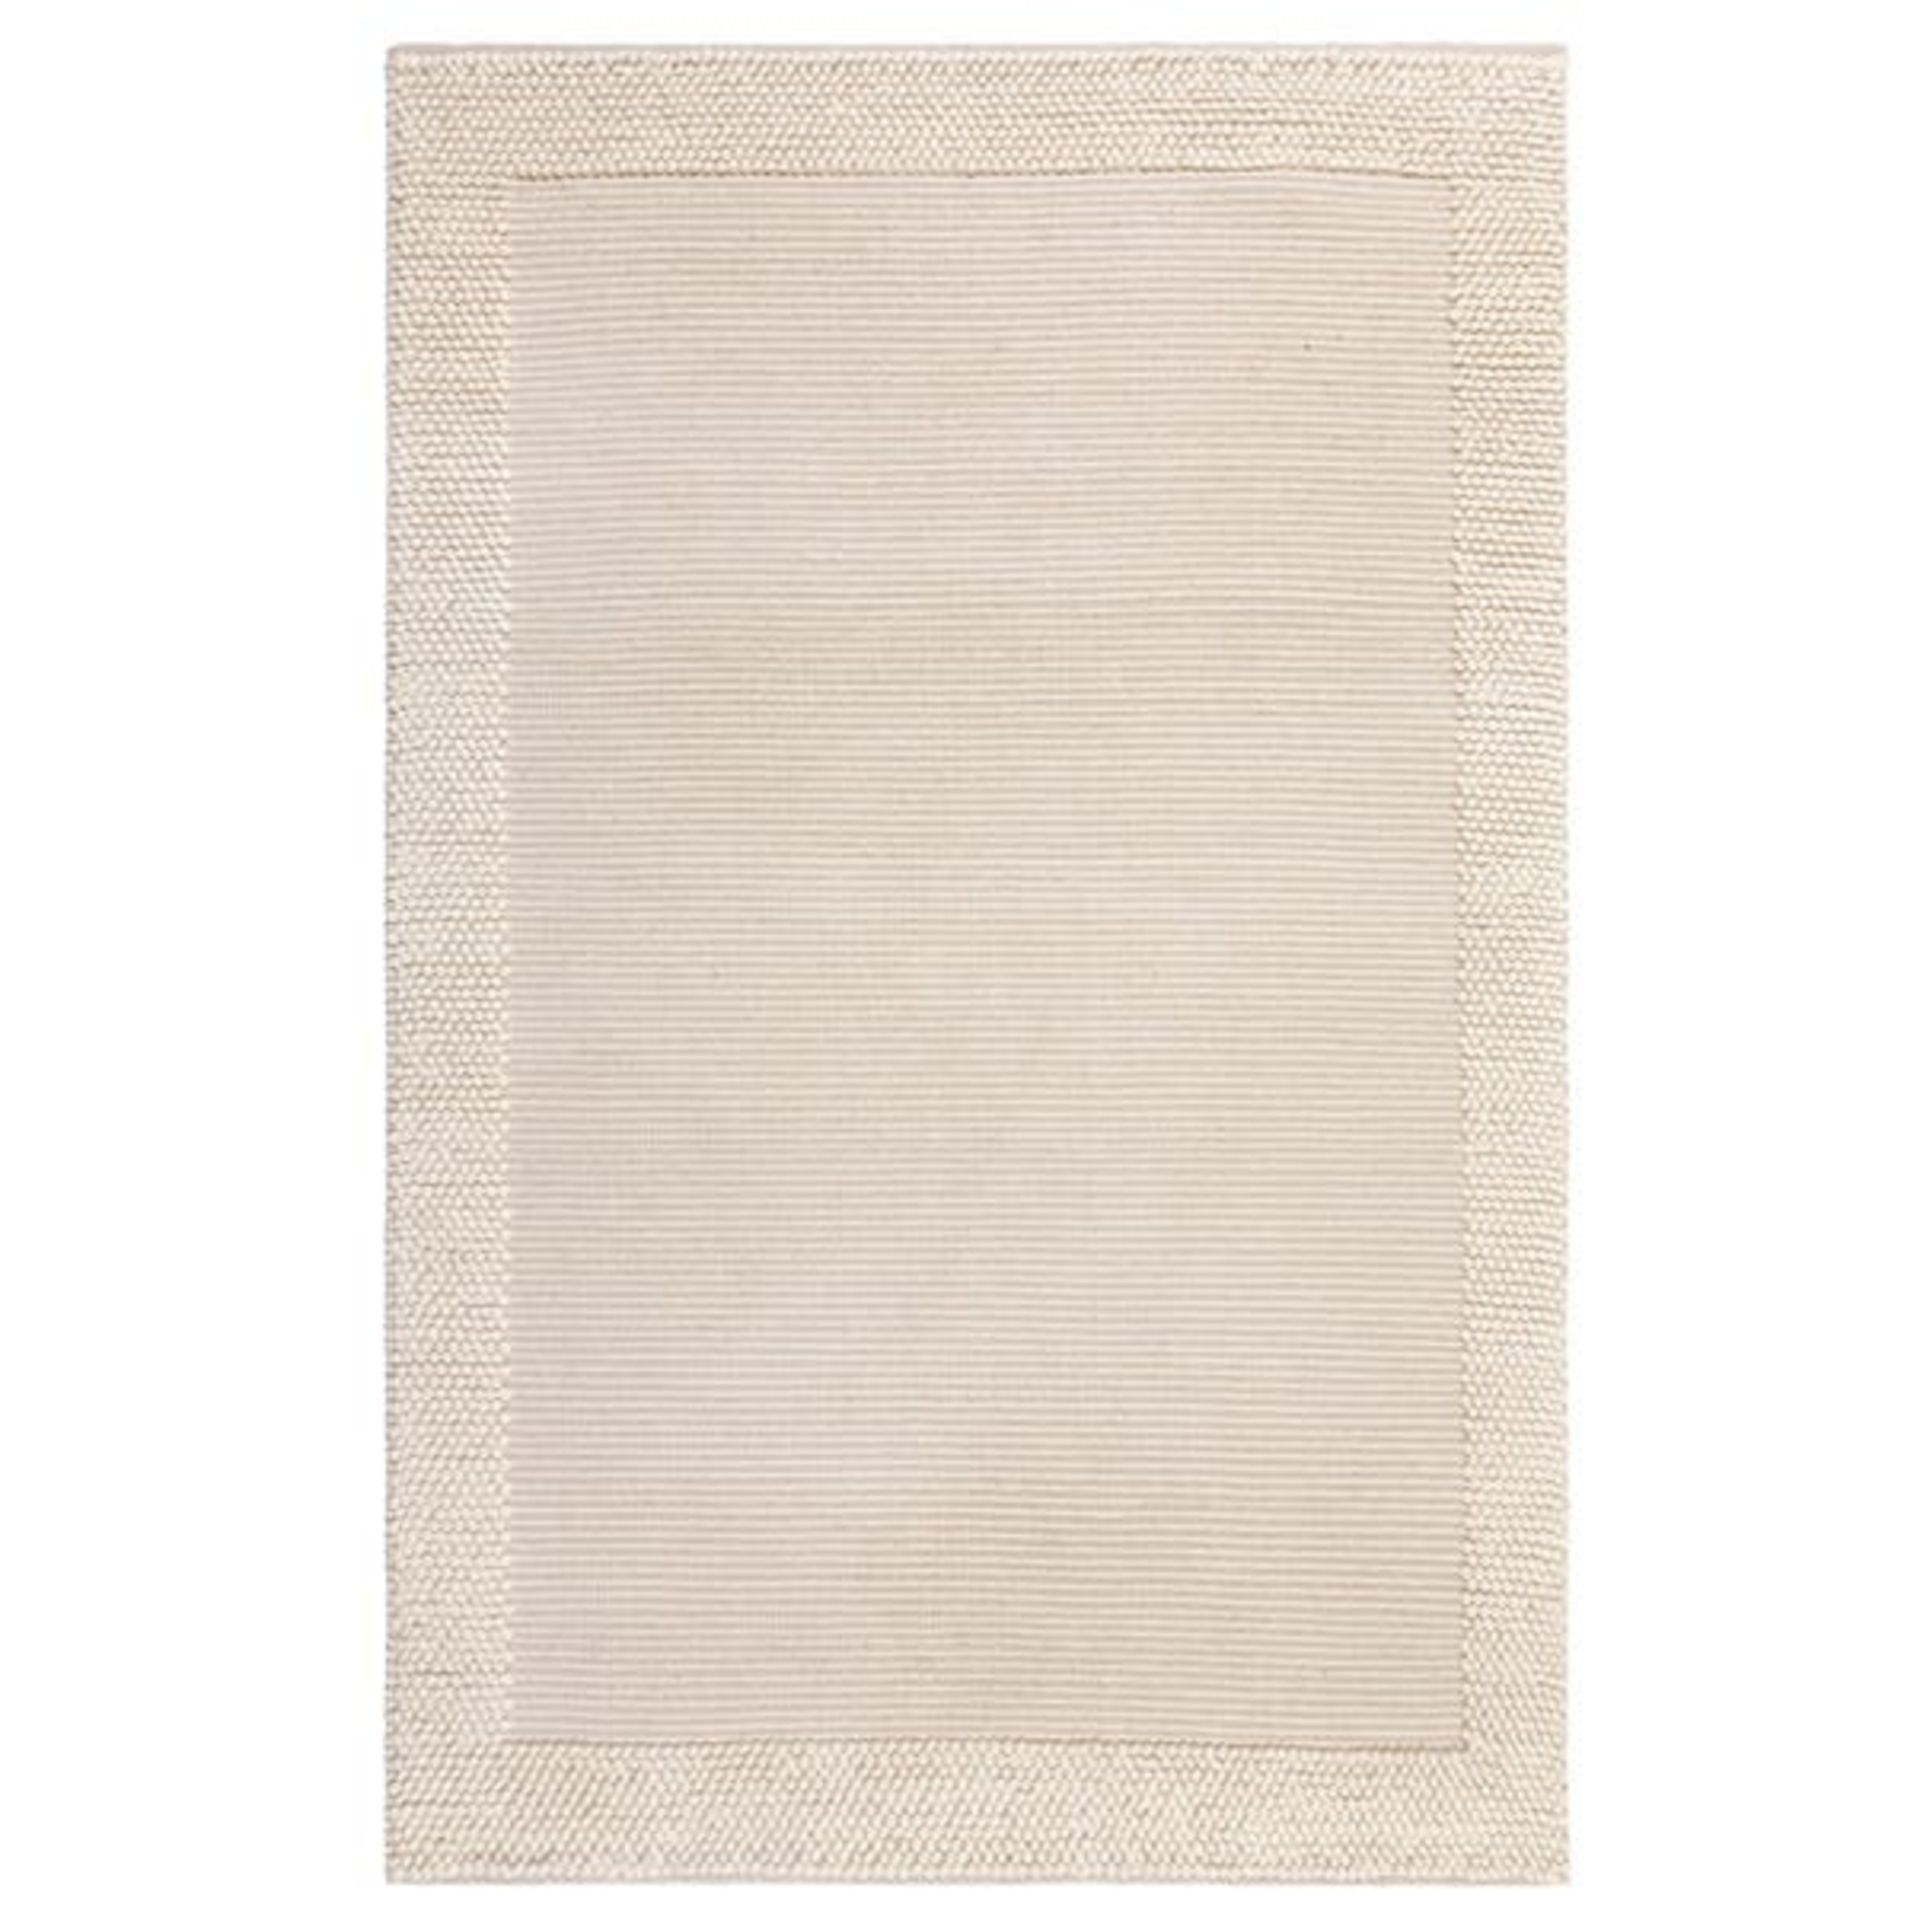 Pebble Wool Border Bobble Wool D040 Ivory Rectangle Rug 160X230cm RRP 169.00 About the Product(s)